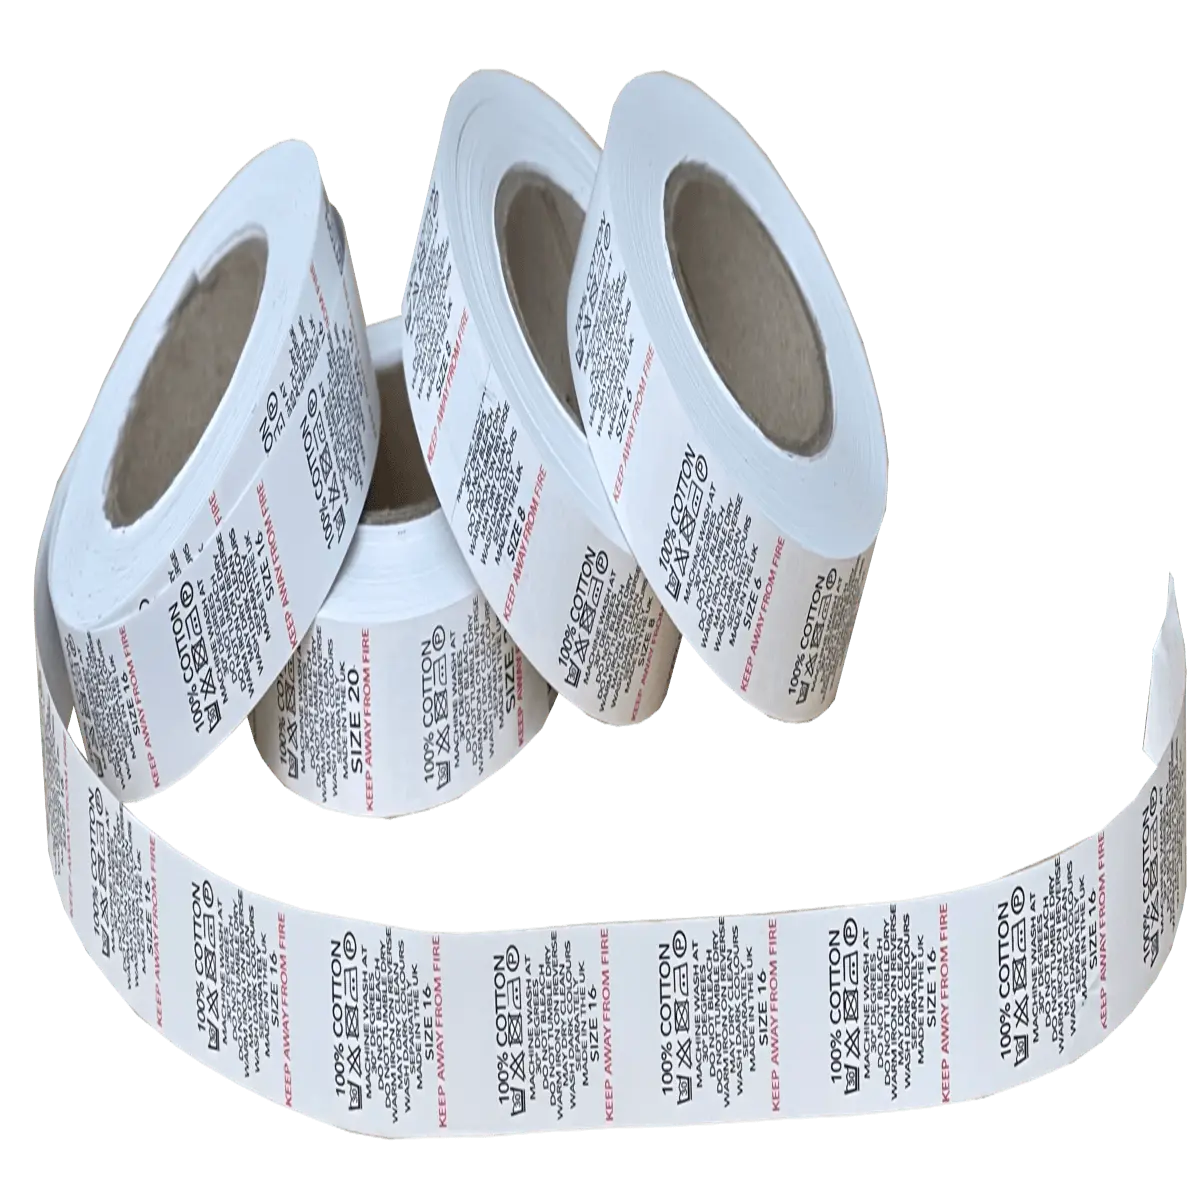 Printed Nylon Size & Content Labels On a Roll - "100% Cotton"